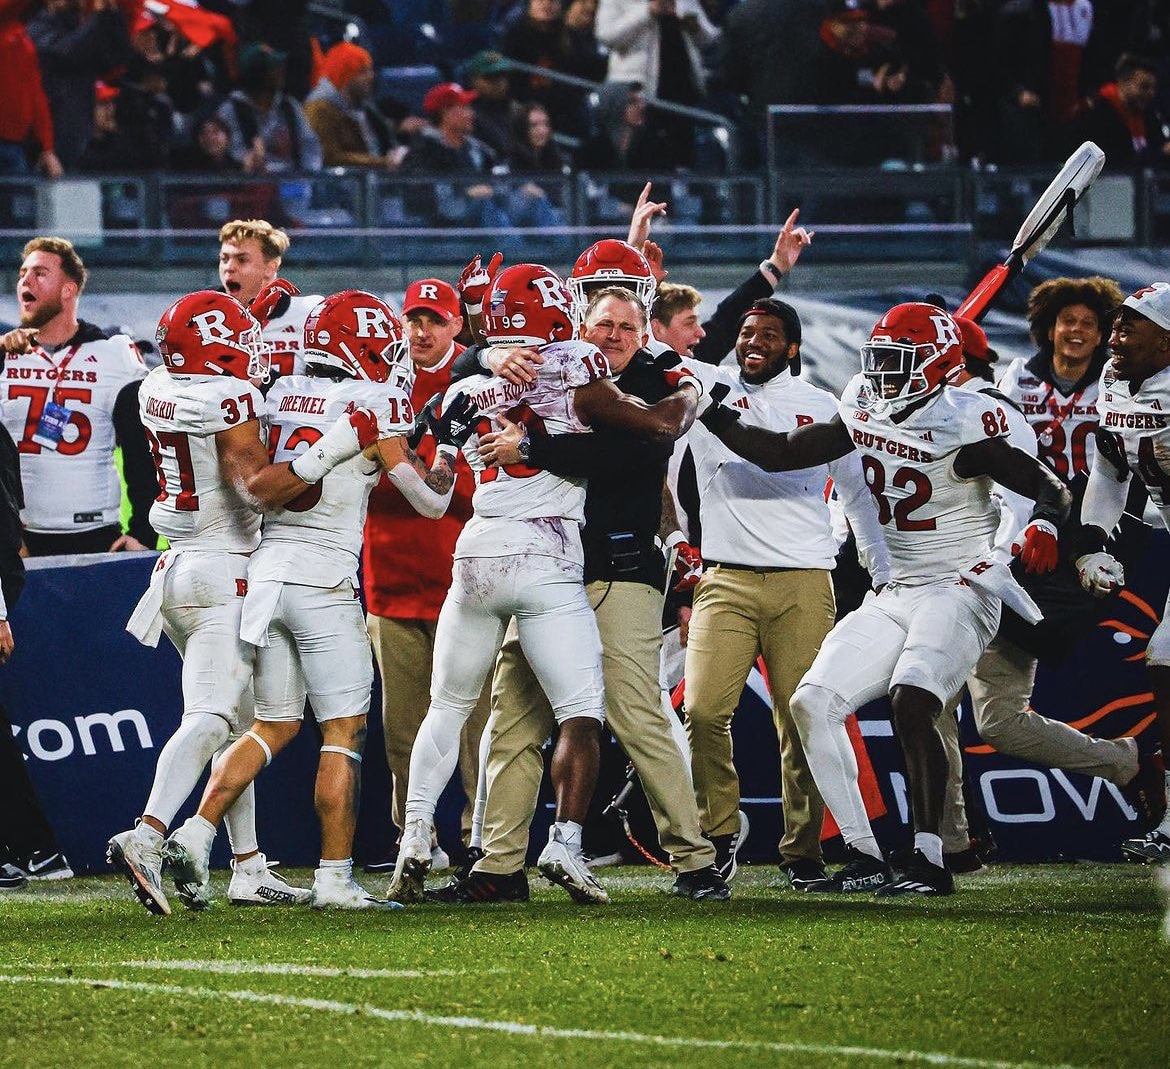 Kyle Monangai rushes for a total of 163 yards to contribute significantly to Rutgers’ victory against Miami in the Pinstripe Bowl